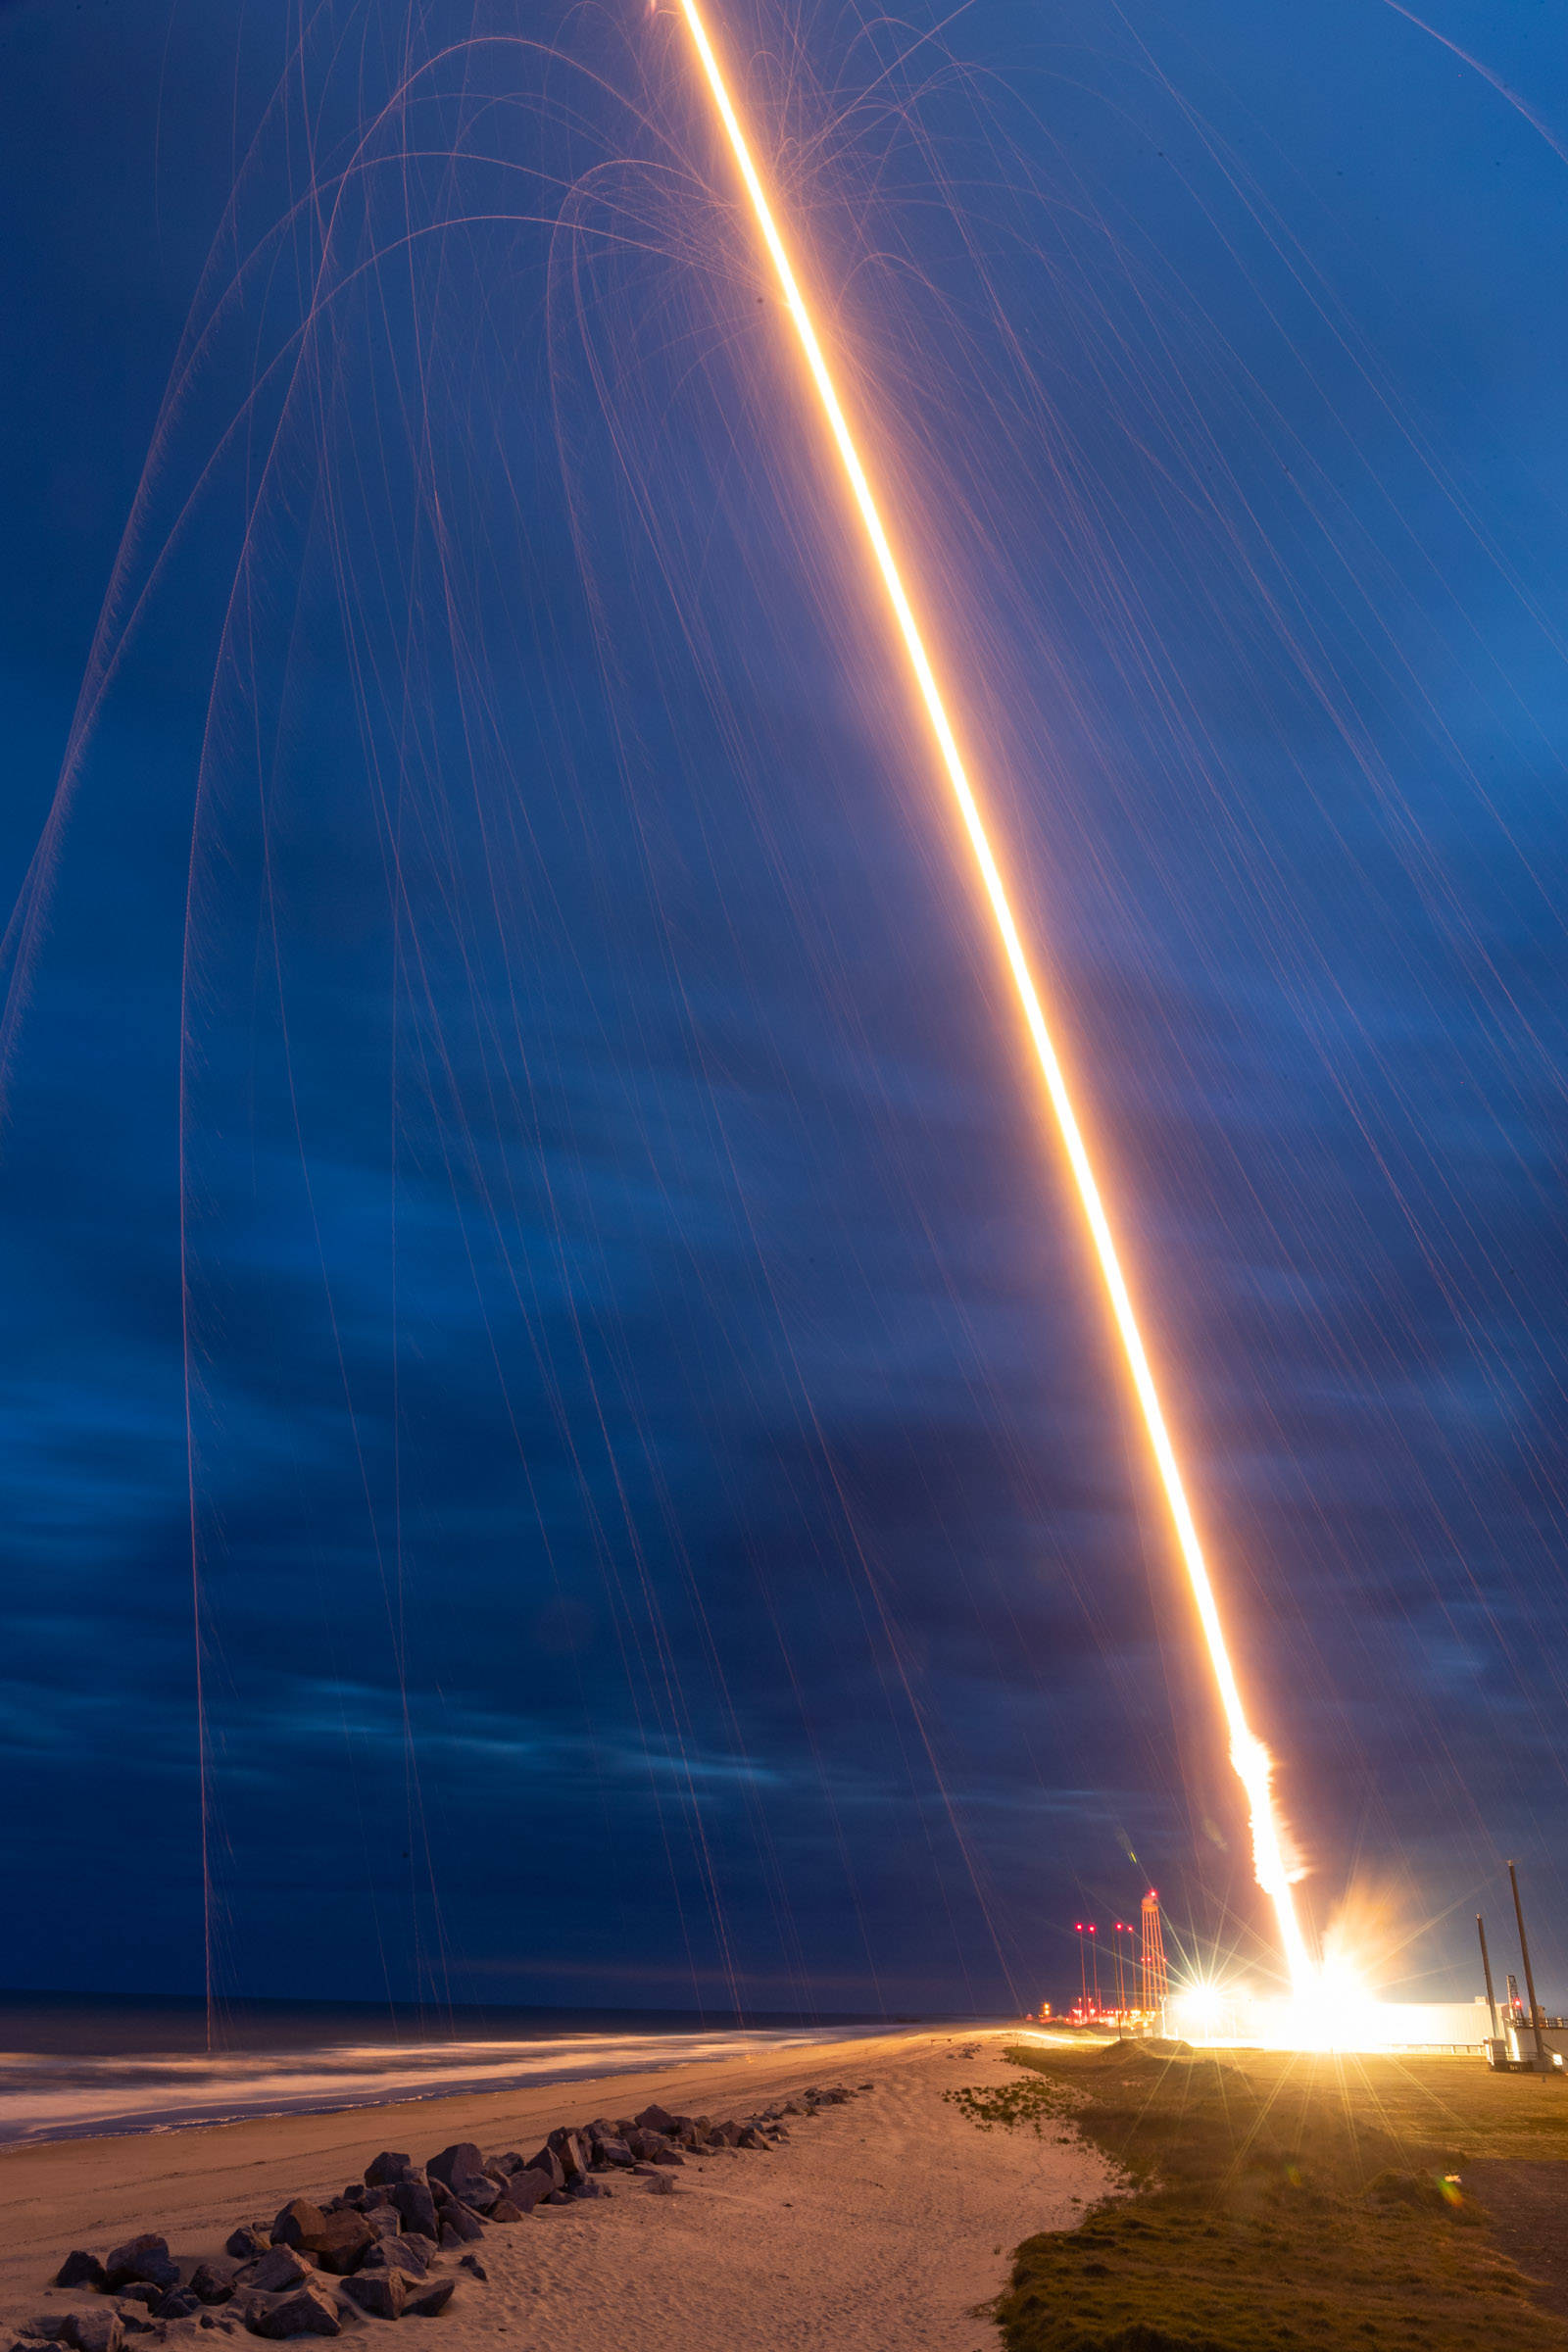 The NASA Black Brant XII rocket lifts off with the KiNET-X experiment at Wallops Flight Facility in Virginia on May 16, 2021. (Allison Stancil / NASA)